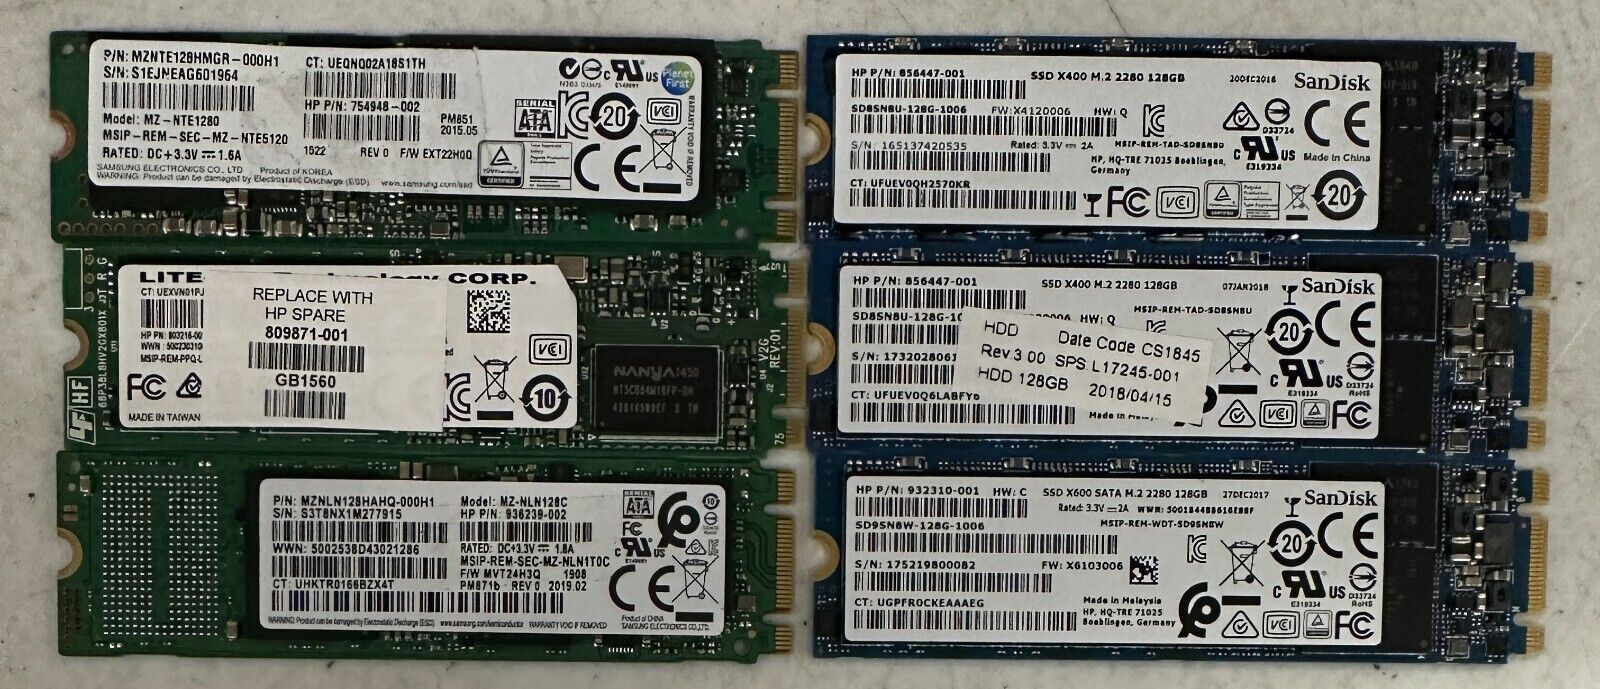 Mixed Lot of 6 128GB SATA M.2 2280 SSD SanDisk Samsung+ Fast FREE US Shipping